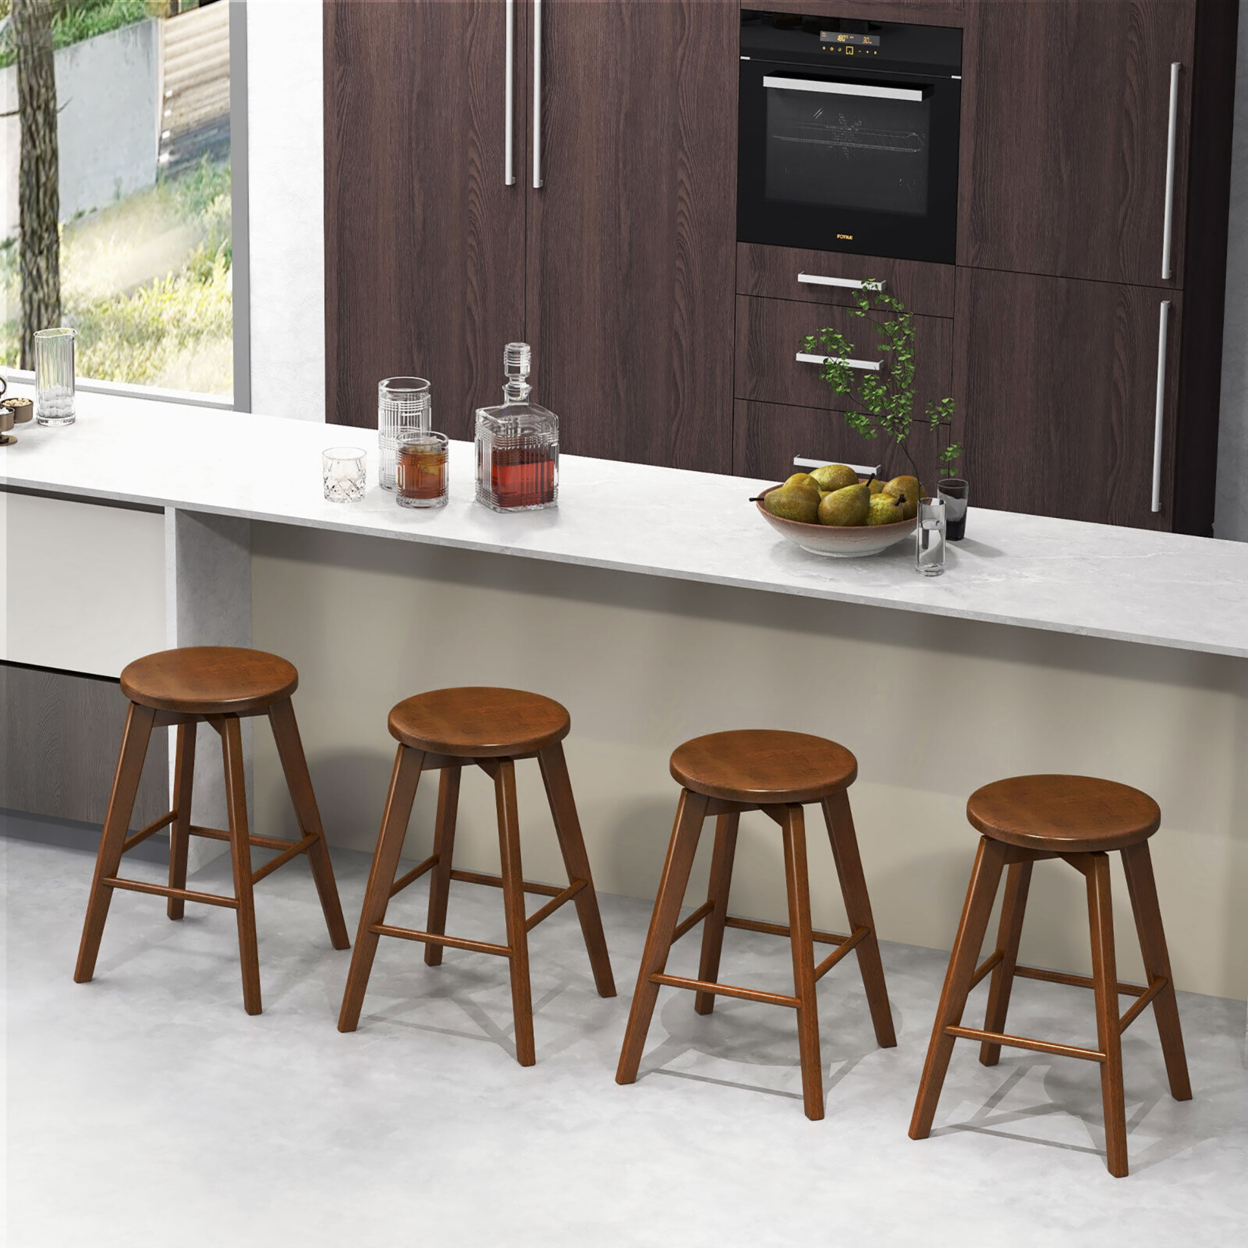 Set Of 4 Swivel Round Bar Stools Counter Height Dining Chairs W/ Rubber Wood Legs